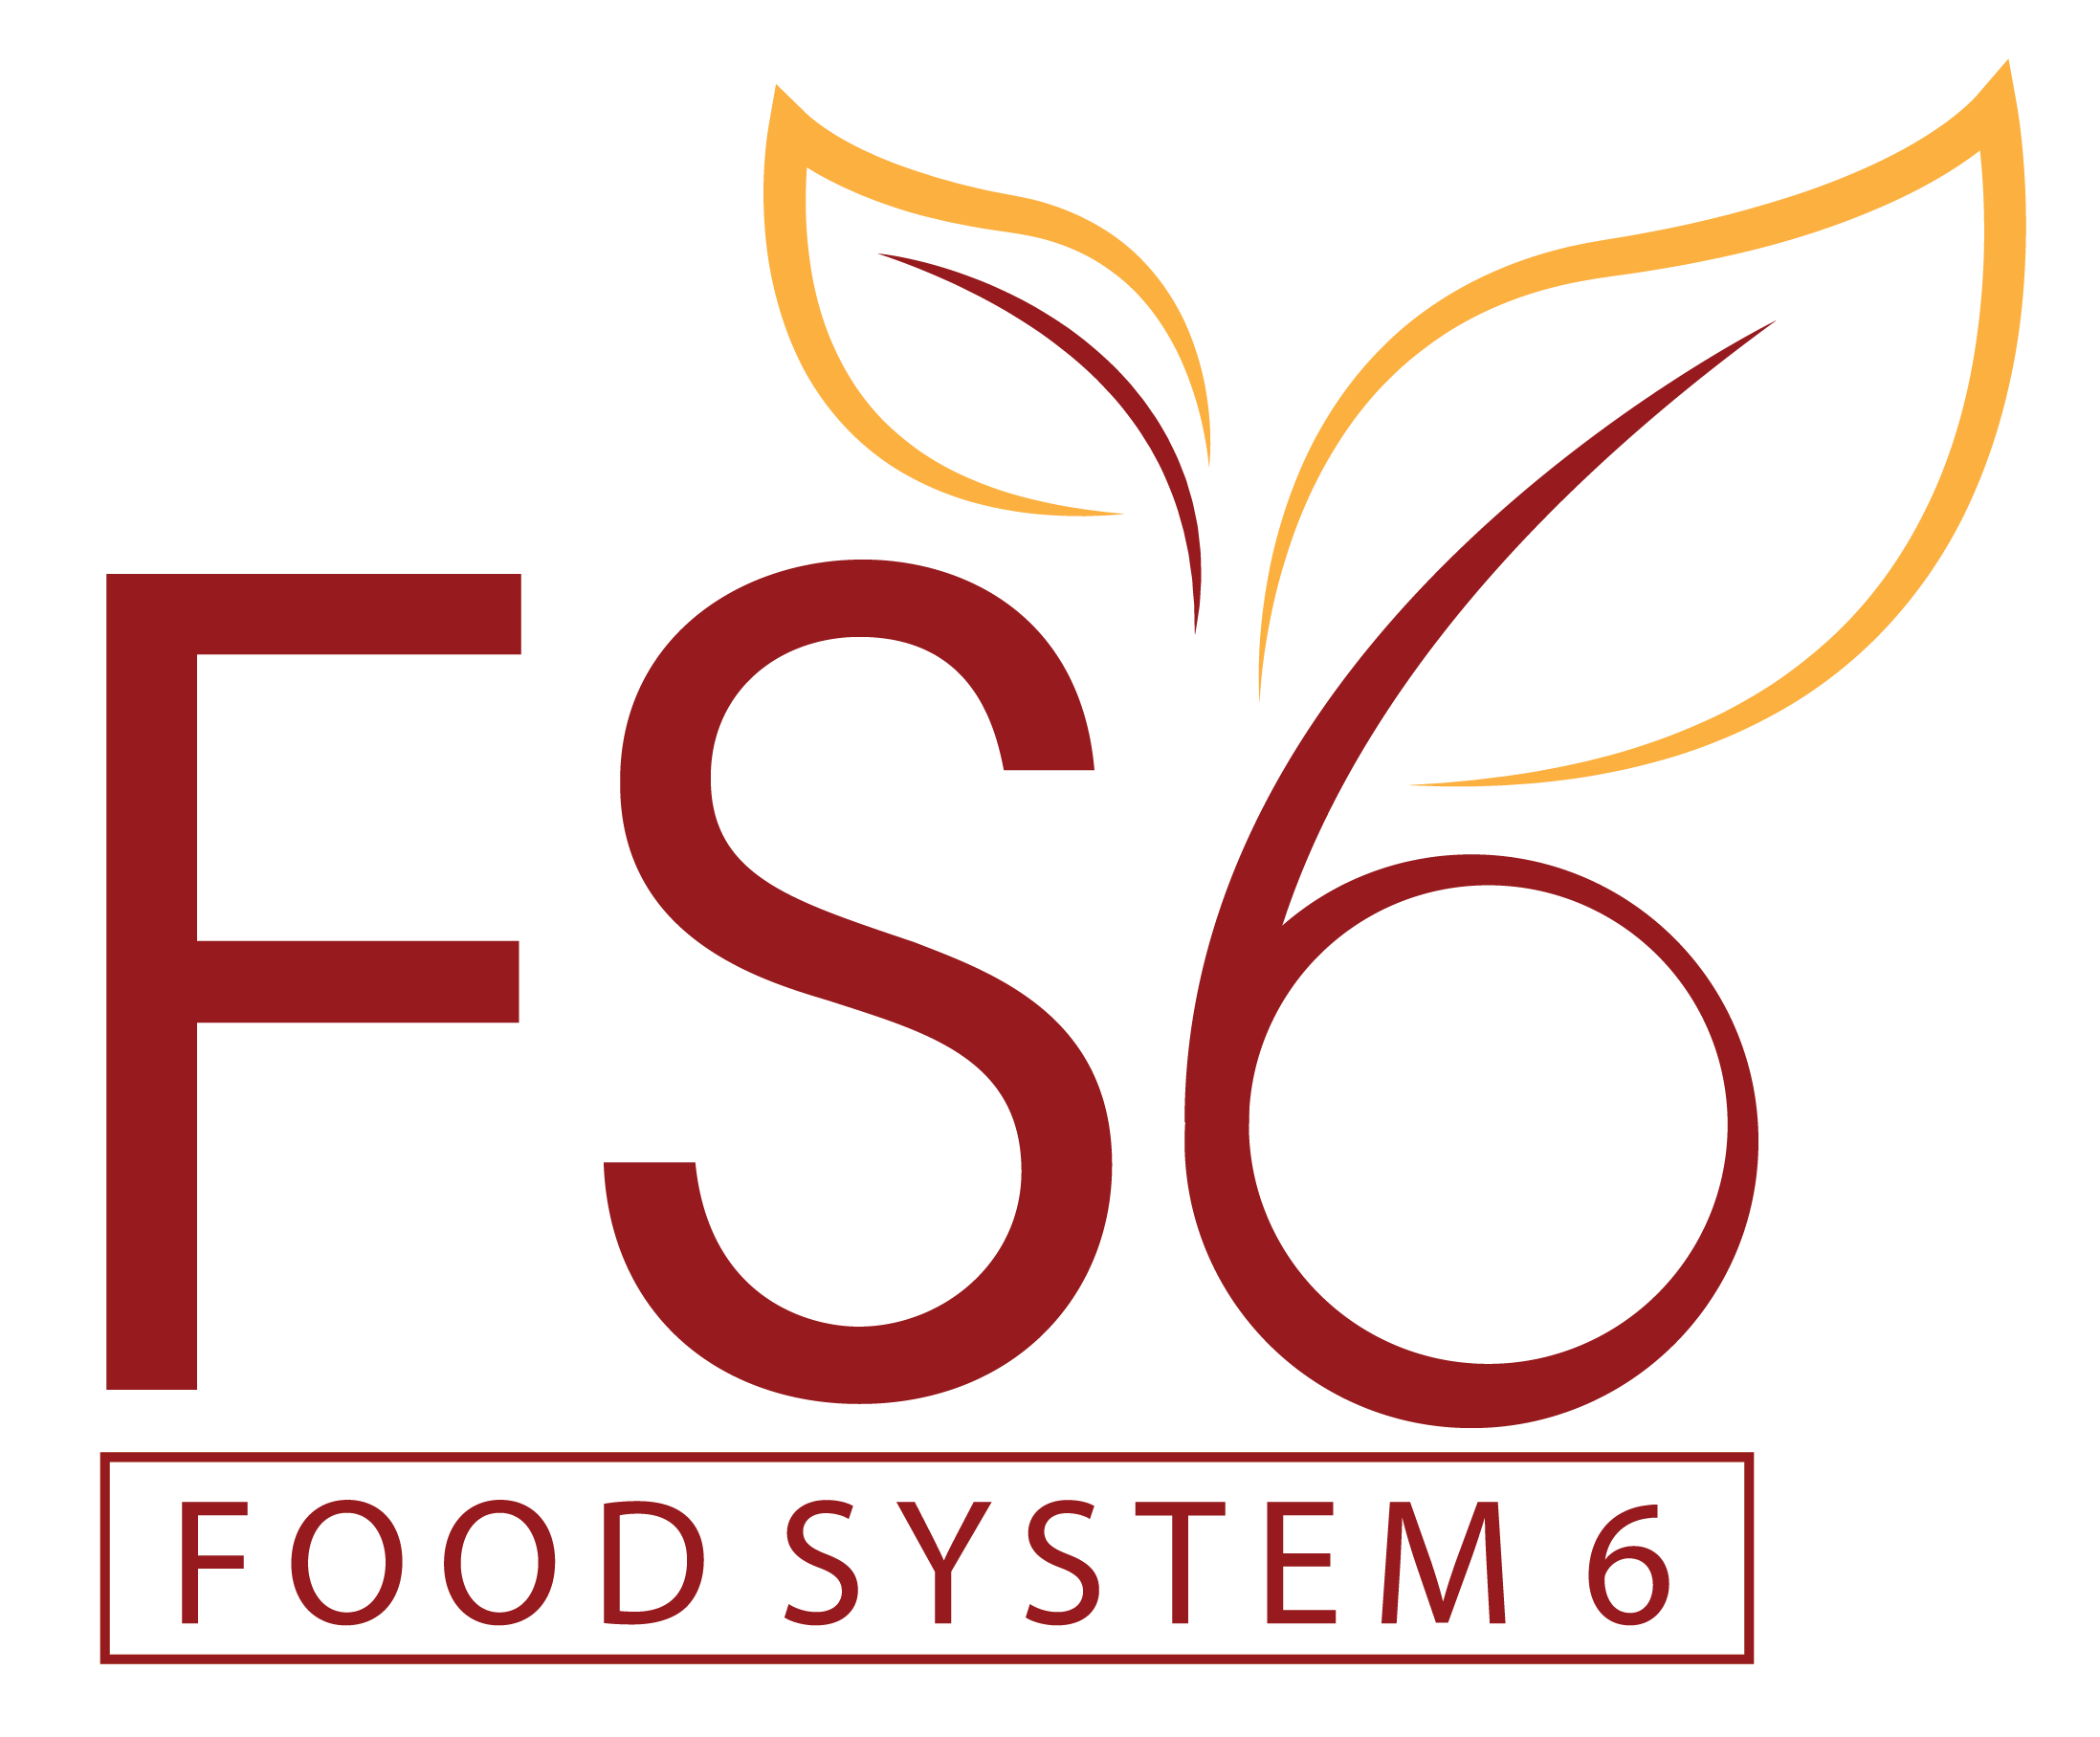 To help us accomplish this, we are extremely excited to announce our 2020 Innovation Partner, Food System 6 (FS6) - a Bay Area-based non-profit whose mission is to support impact-driven entrepreneurs as they transform how we grow, produce, and distribute food.
 
FS6 runs a comprehensive accelerator program that mentors entrepreneurs by coaching them through a wide range of business and organizational needs. The organization also works to educate stakeholders on the unique capital needs as related to redefining the food system. The FS6 program prioritizes working with entrepreneurs who are building a food system that focuses on health, sustainability, and justice - whether through food-tech, supply chain, or access-focused solutions.